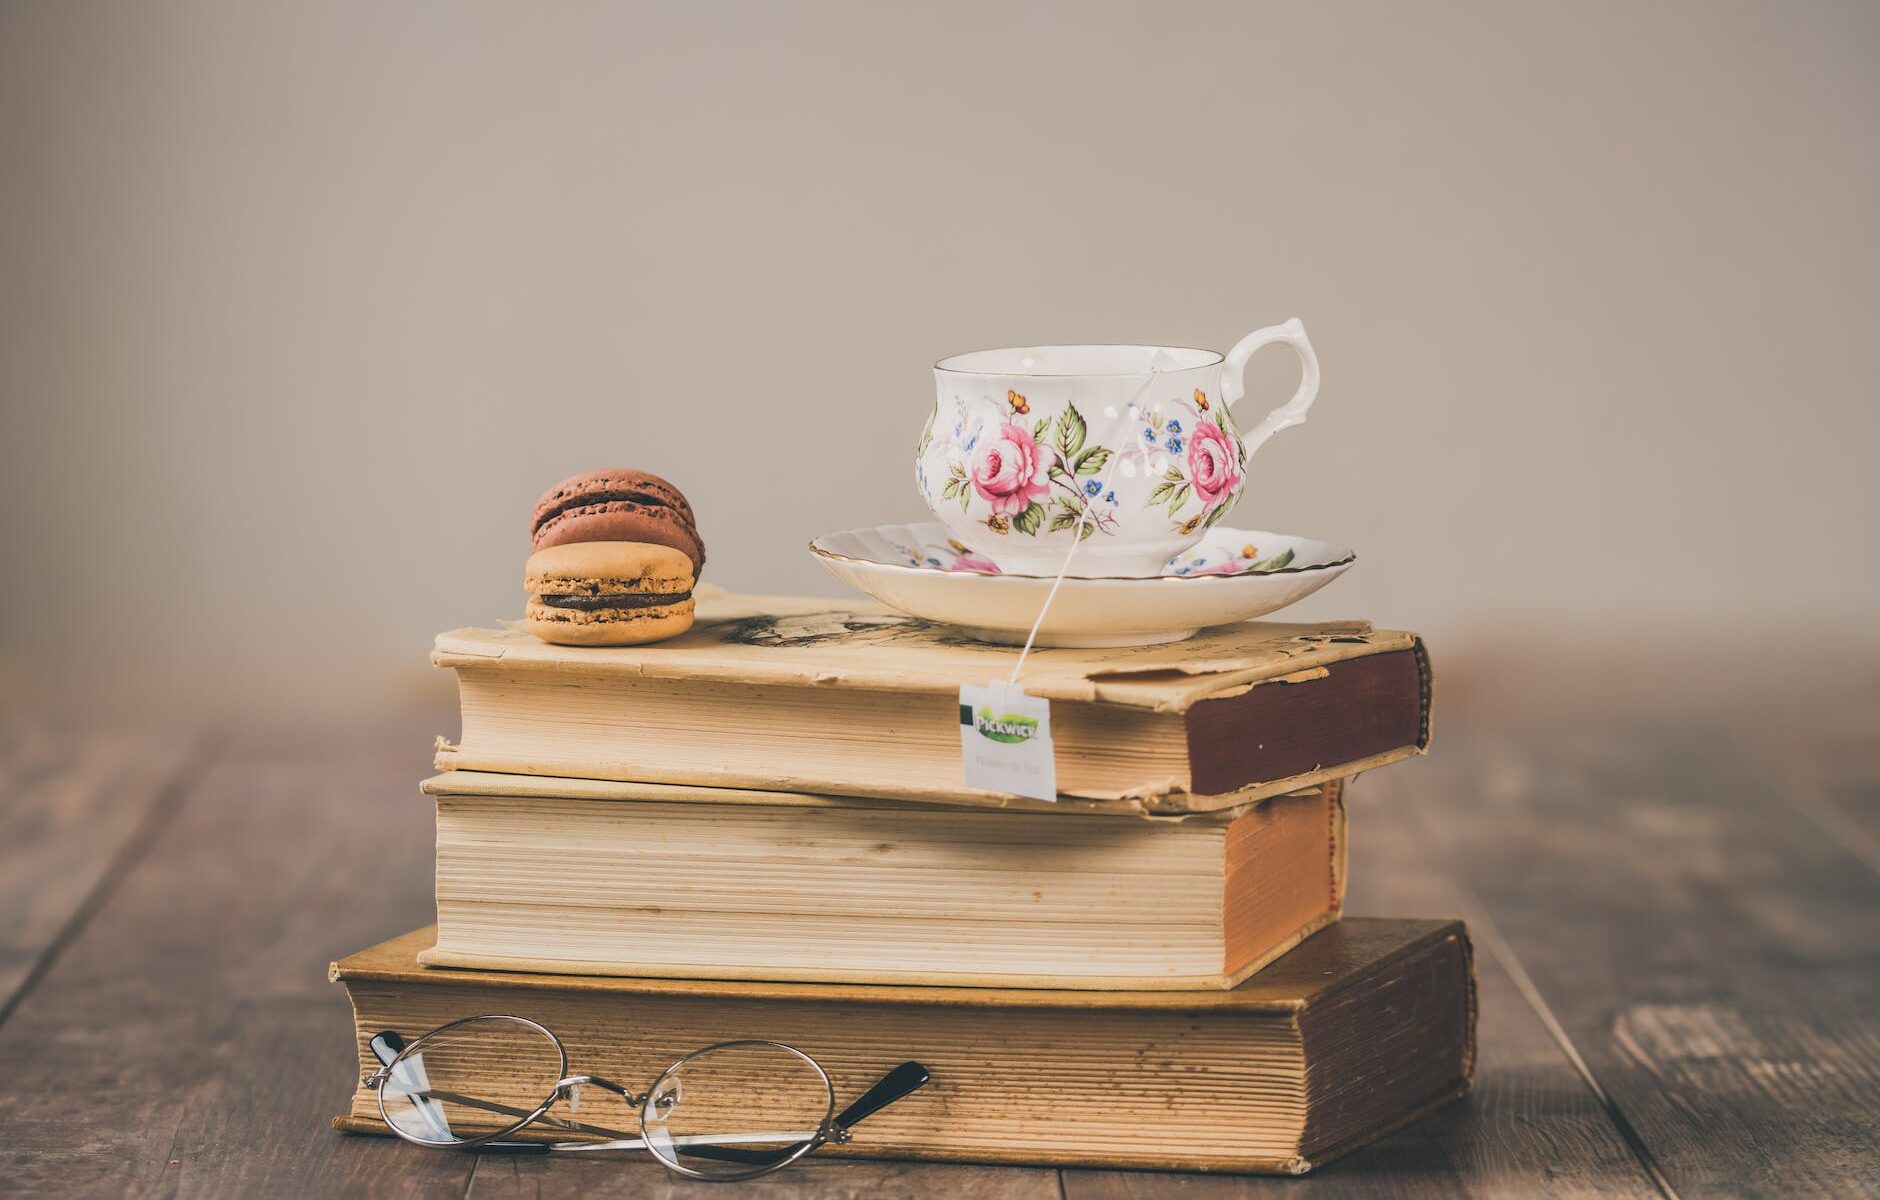 photo of teacup on top of books